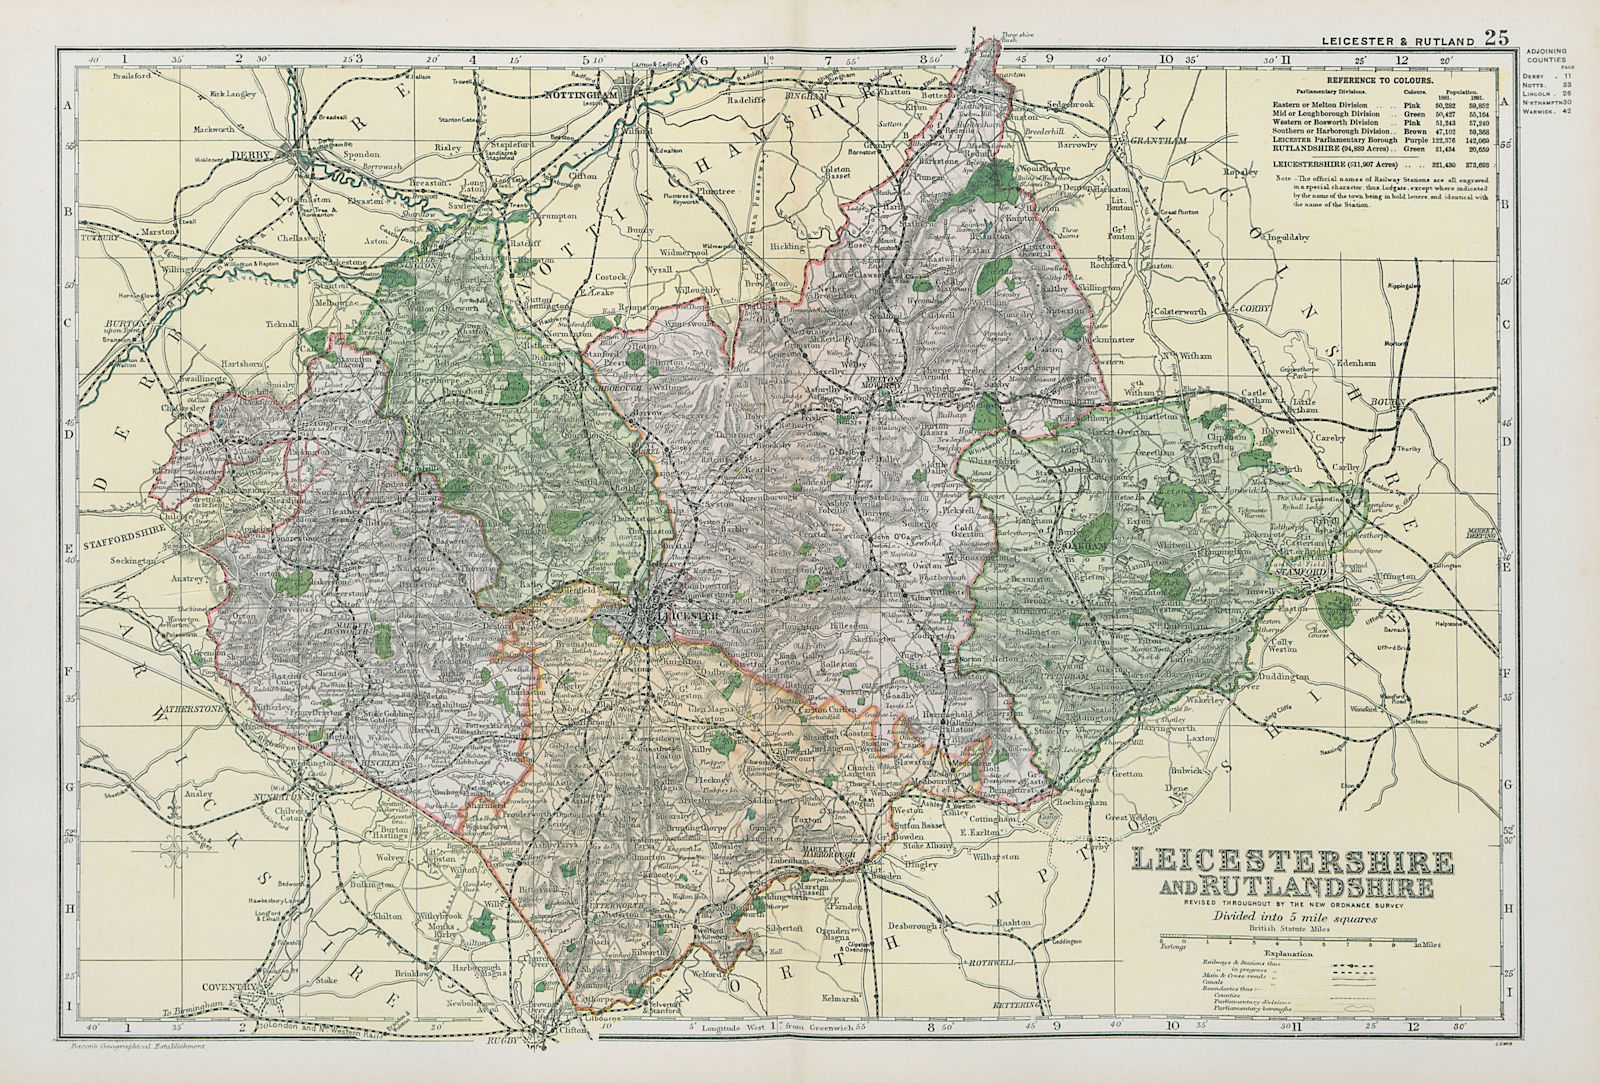 LEICESTERSHIRE AND RUTLANDSHIRE. Parliamentary divisions & parks. BACON 1900 map